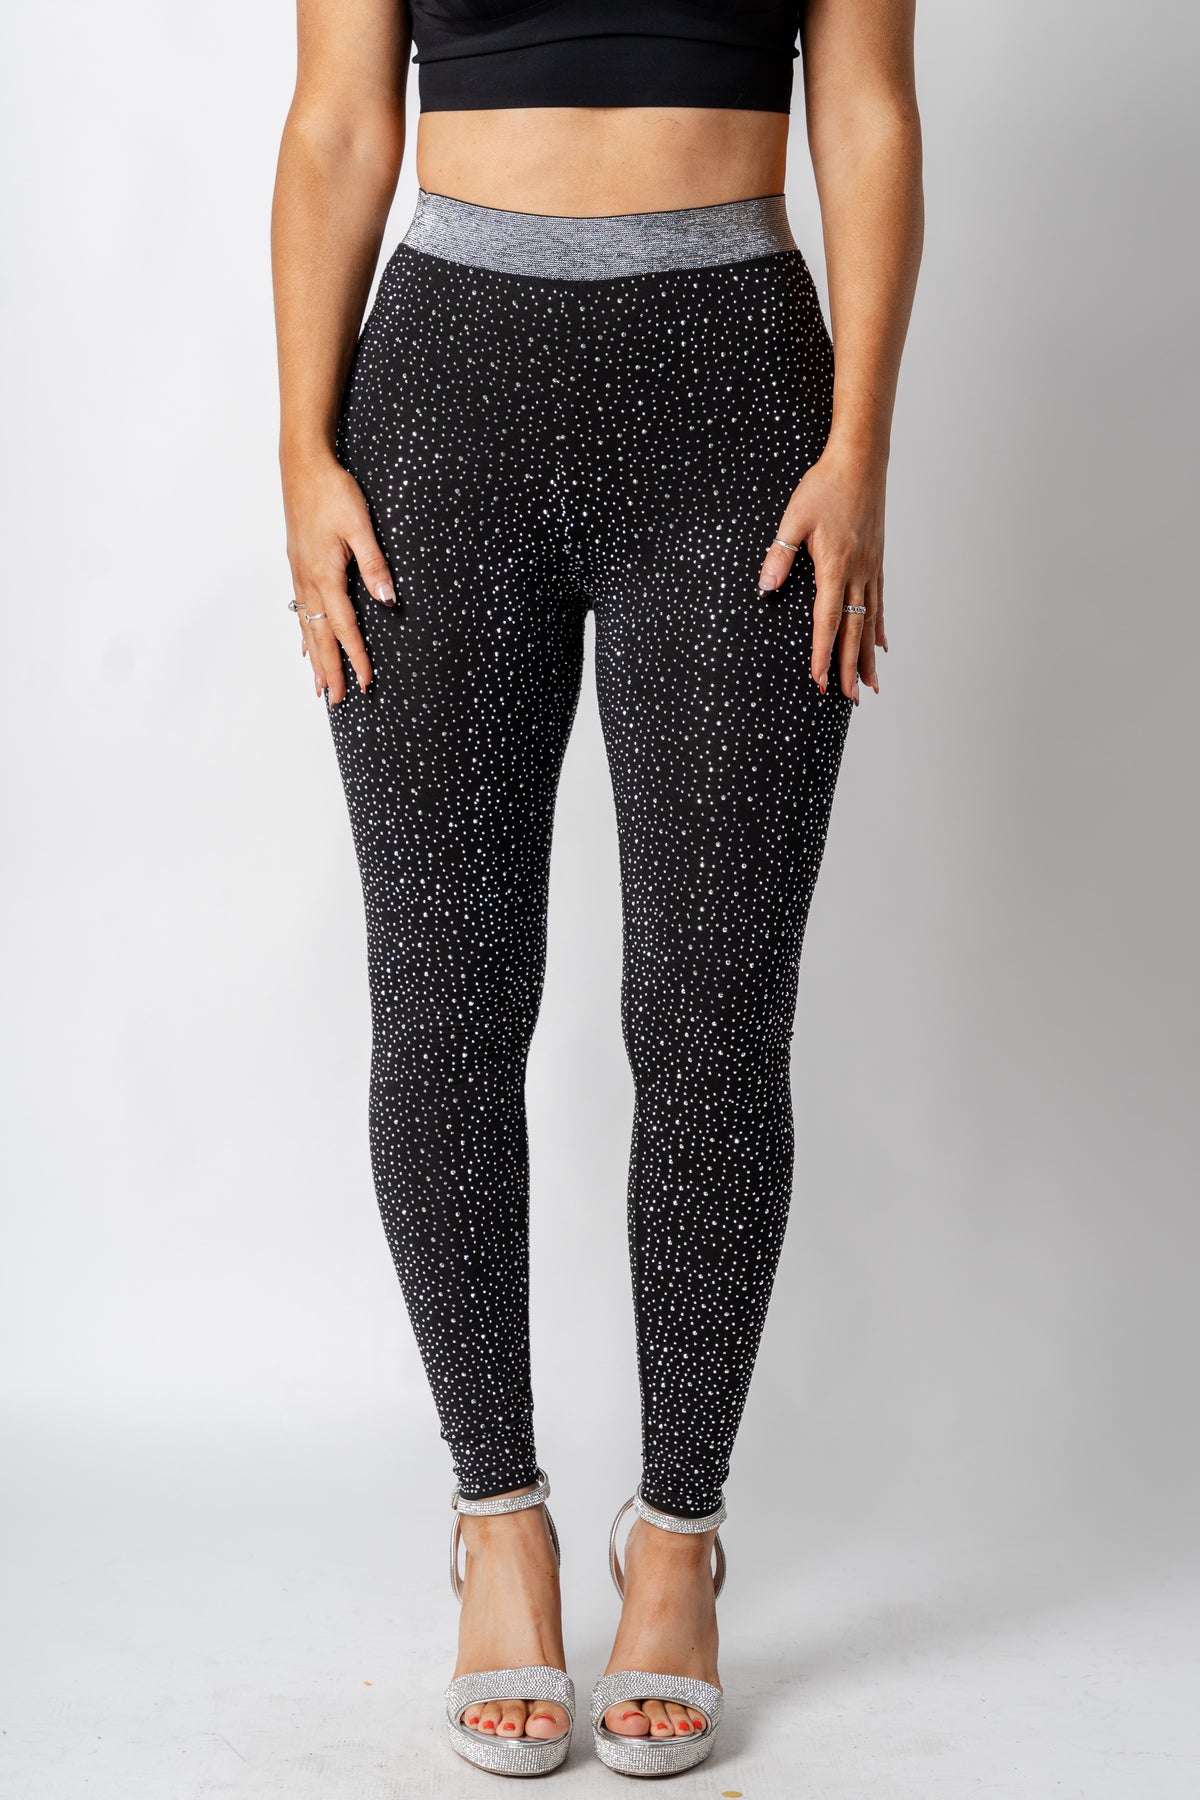 Rhinestone leggings black - Trendy New Year's Eve Outfits at Lush Fashion Lounge Boutique in Oklahoma City